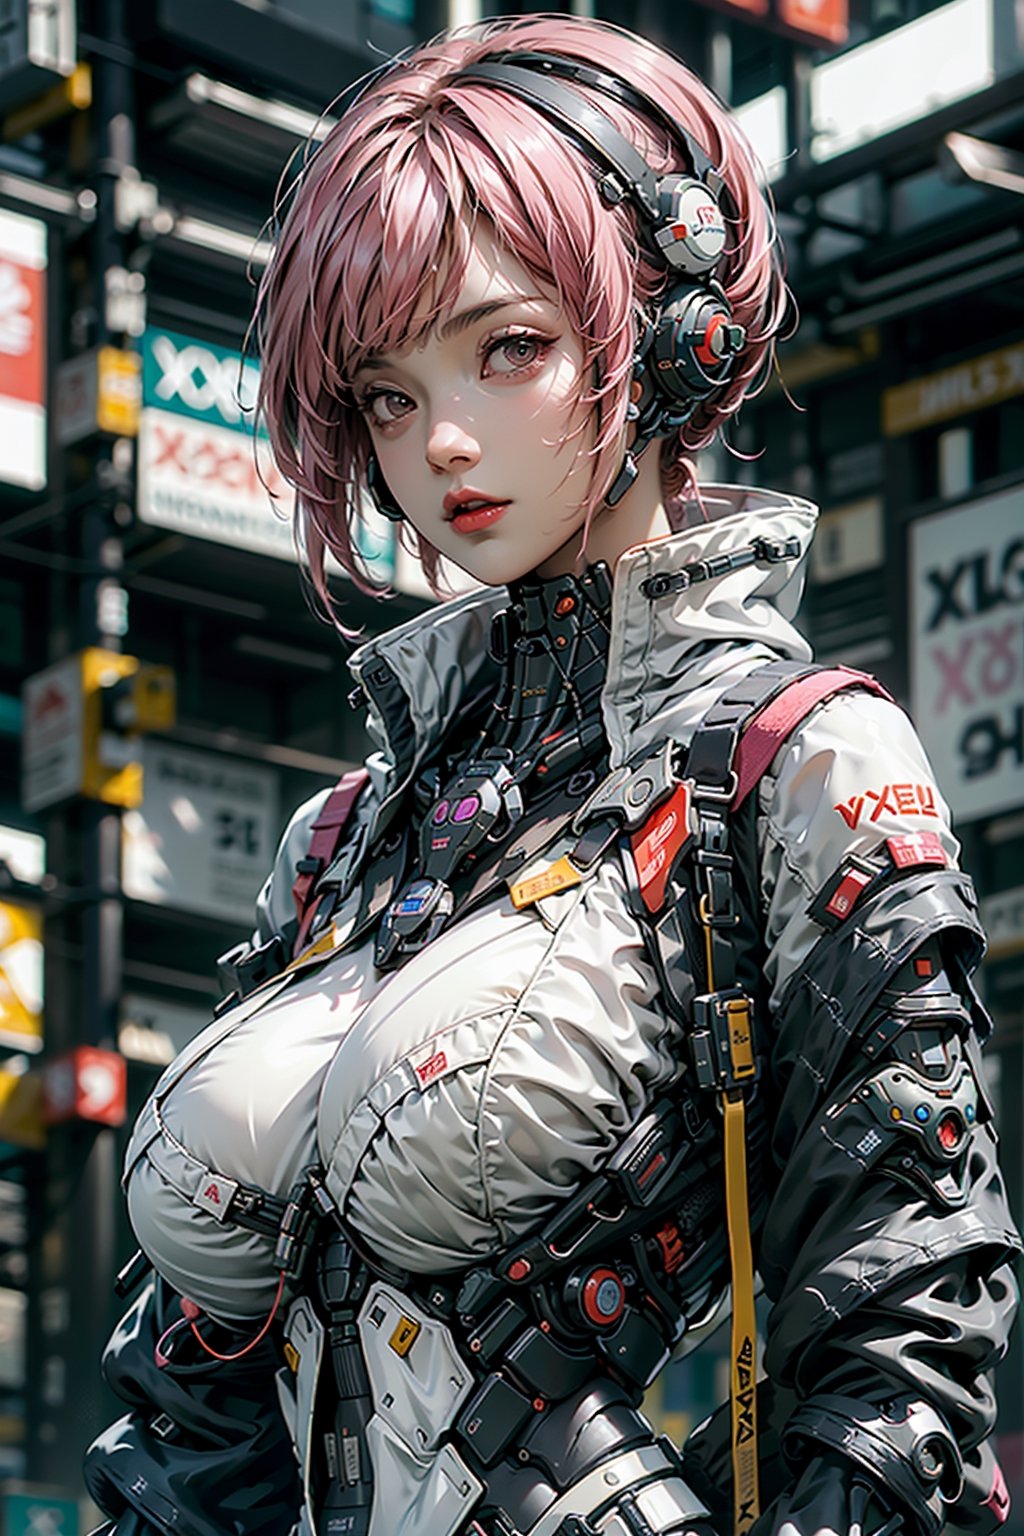 xxmixgirl, 1girl, solo, cybirg style, cyborg, wire, cable, android, mechanical body part, looking_at_viewer, xxmix_girl, authentic breasts, extremely short waist, loli, Perky, voluptuous breasts, Upright bosom, (big breasts :1.8), Pink hair, childlike face, hd, UHD, super detail, high details, 16k, cyberpunk style, cyborg style